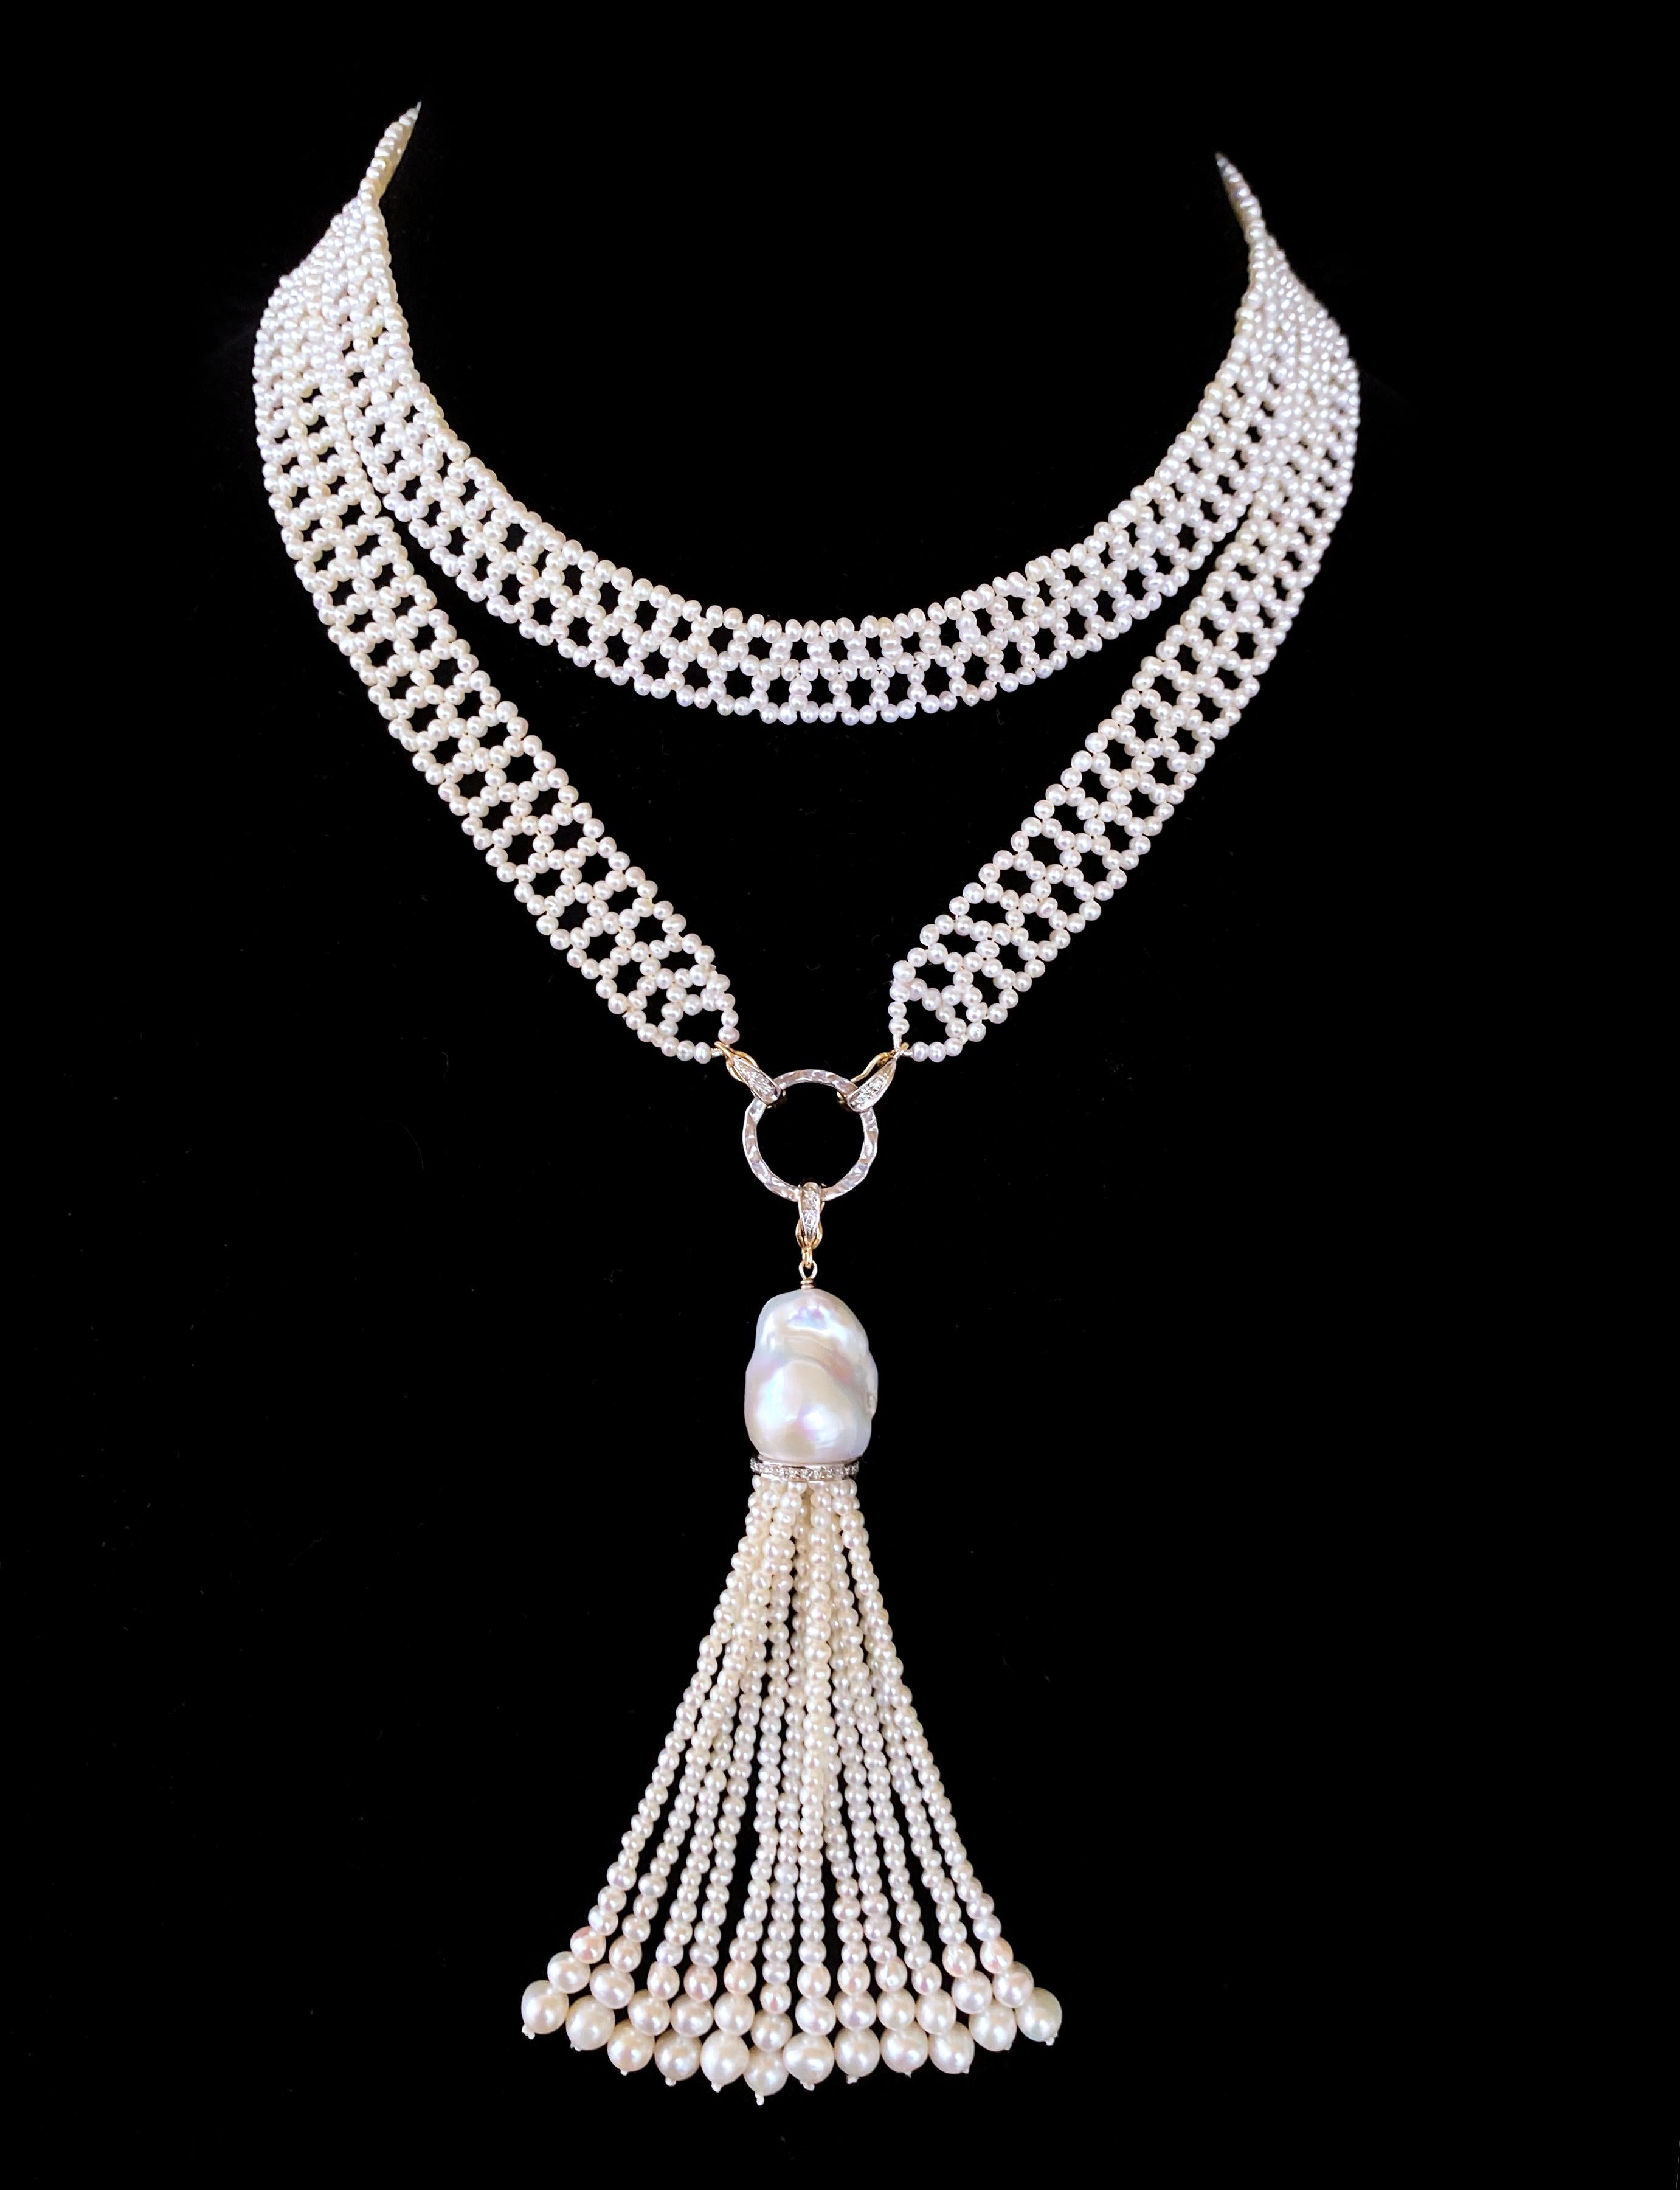 Made by Marina J. This magnificent Victorian inpsired Sautoir features gorgeous Seed Pearls all intricately woven together into a fine lace like design. The seed Pearls in this piece display a white / soft creme like color while holding a beautiful